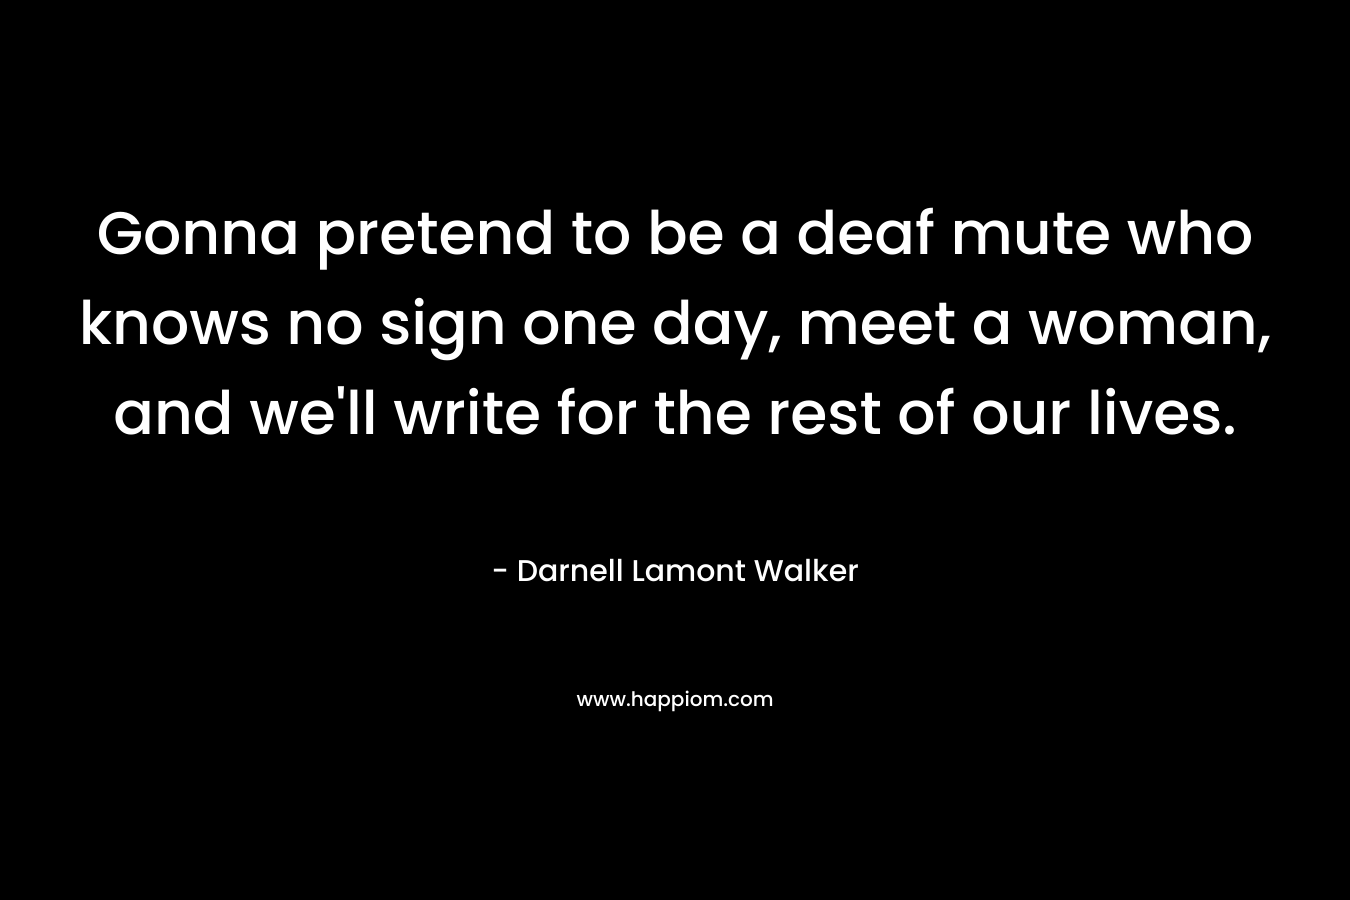 Gonna pretend to be a deaf mute who knows no sign one day, meet a woman, and we’ll write for the rest of our lives. – Darnell Lamont Walker